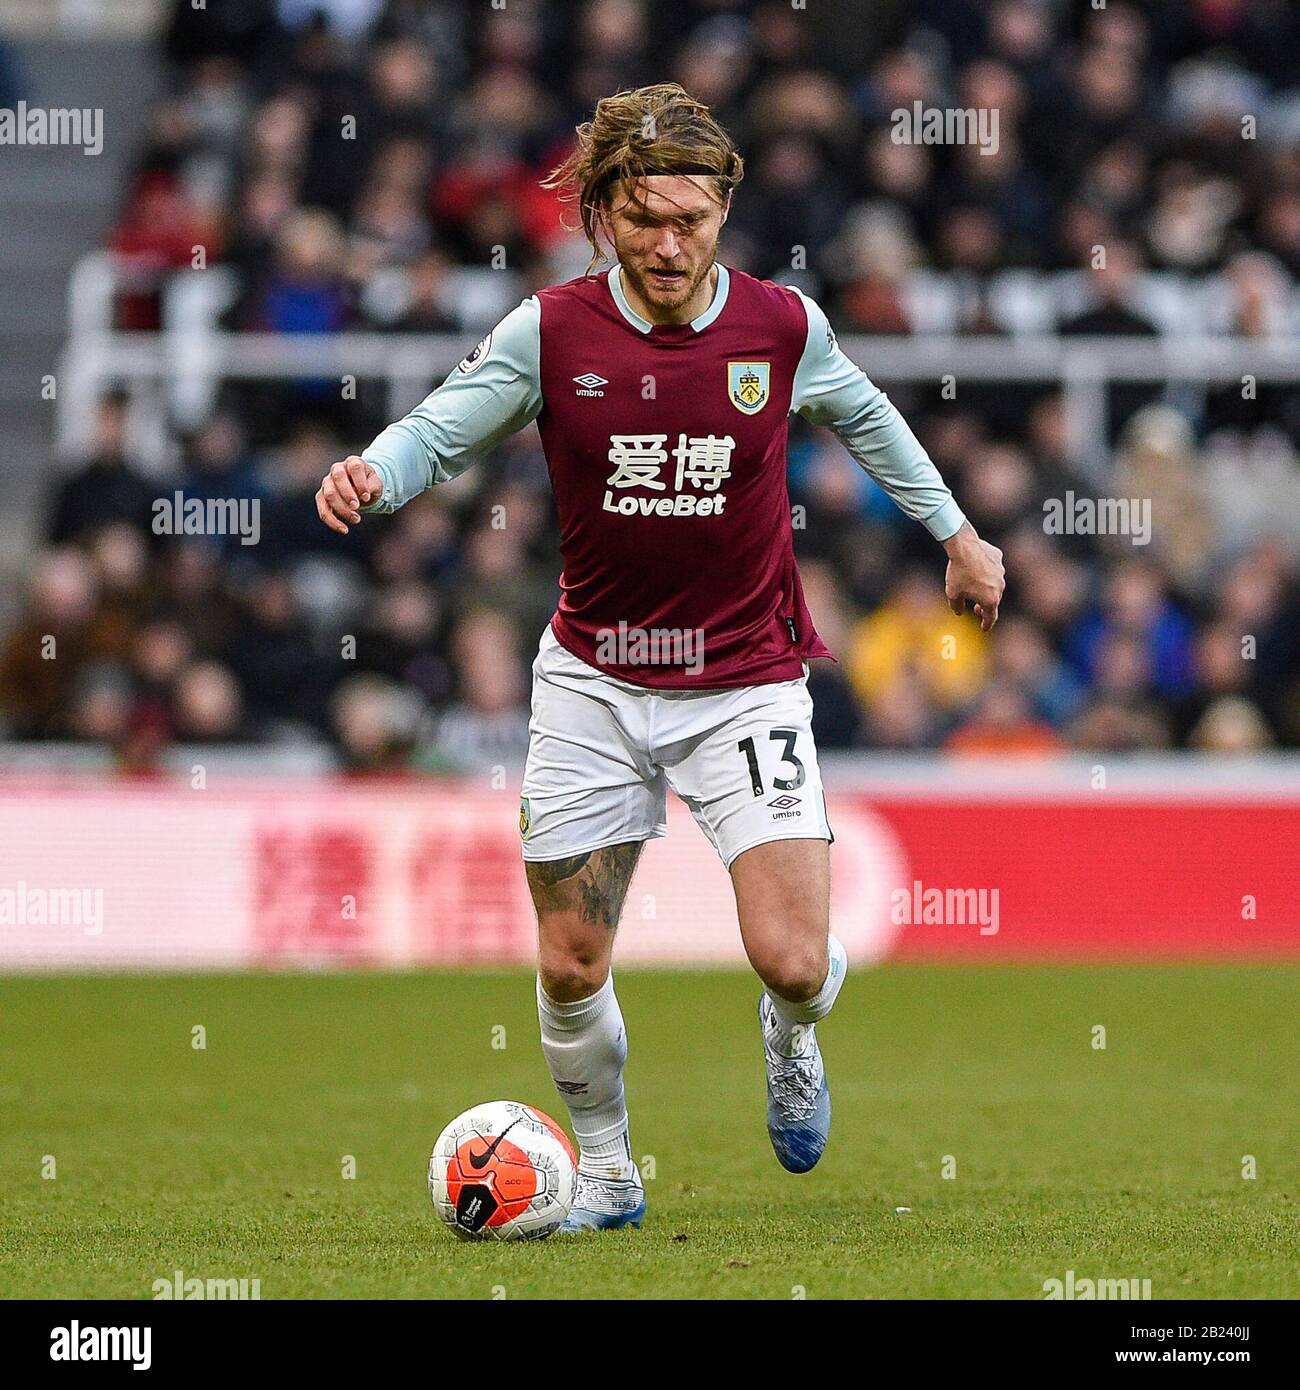 NEWCASTLE UPON TYNE, ENGLAND - FEBRUARY 29TH Jeff Hendrick (13) of Burnley in action during the Premier League match between Newcastle United and Burnley at St. James's Park, Newcastle on Saturday 29th February 2020. (Credit: Iam Burn | MI News) Photograph may only be used for newspaper and/or magazine editorial purposes, license required for commercial use Credit: MI News & Sport /Alamy Live News Stock Photo